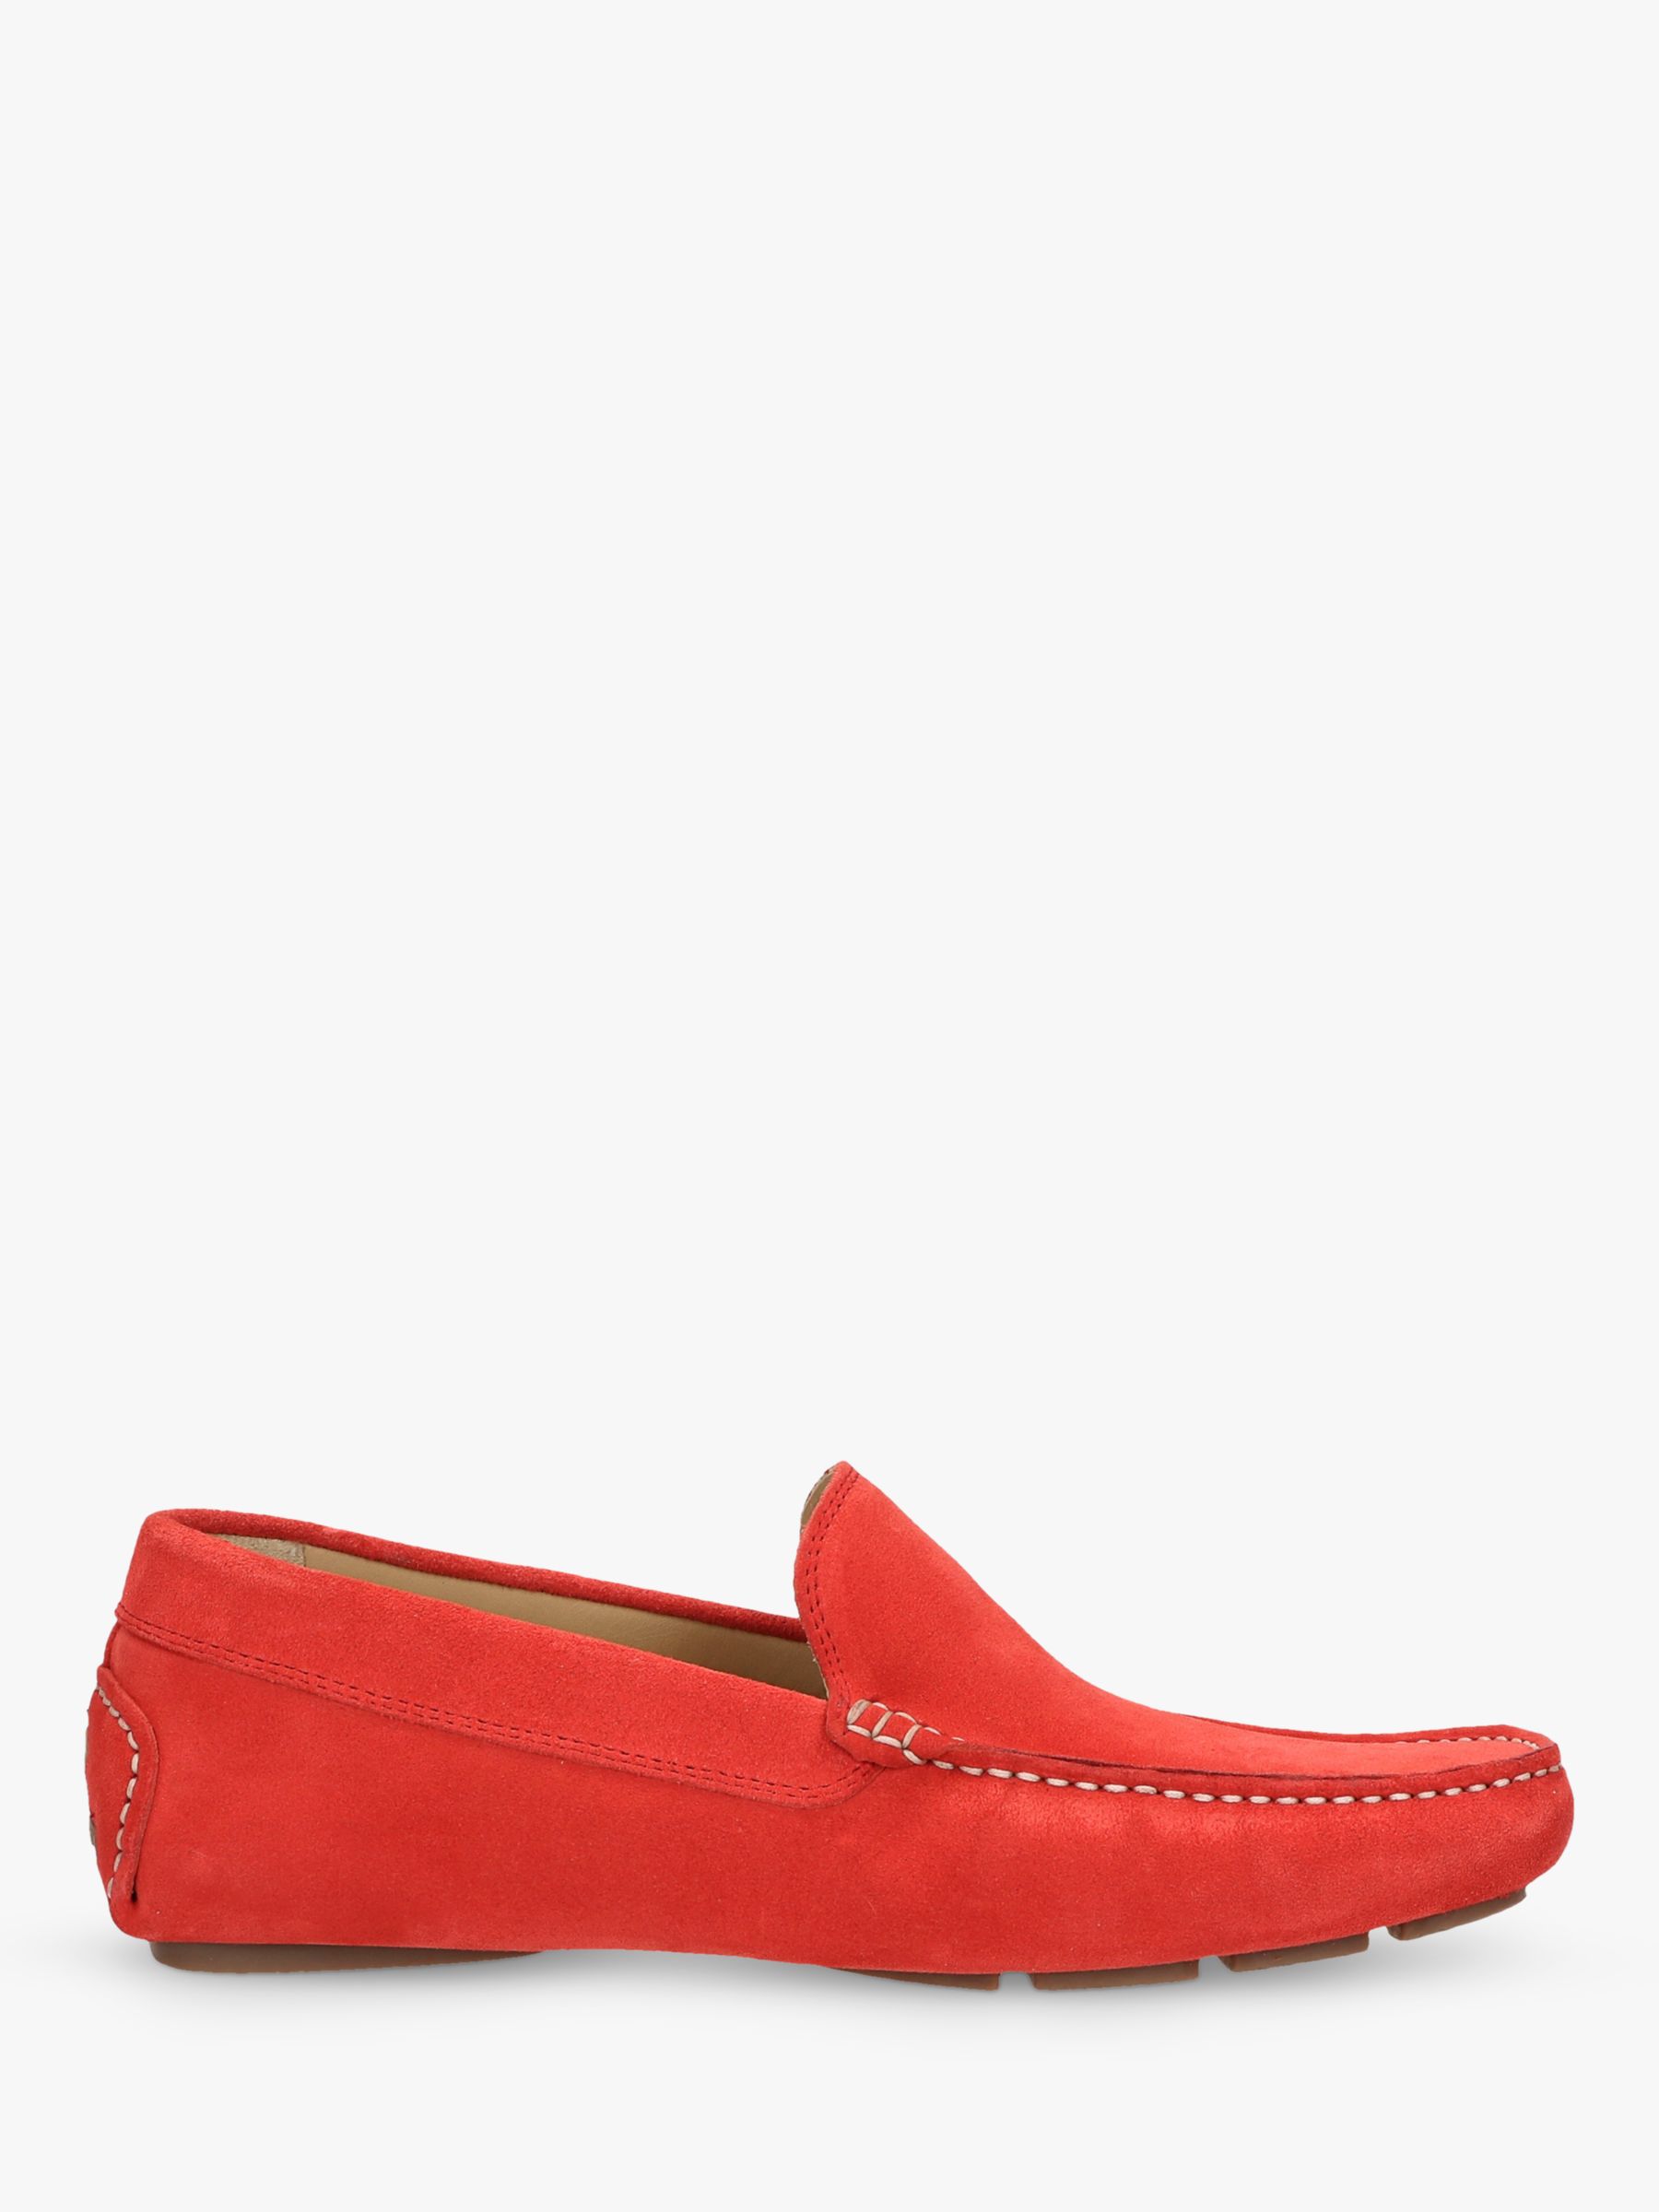 GANT Nicehill Suede Moccasin Loafers